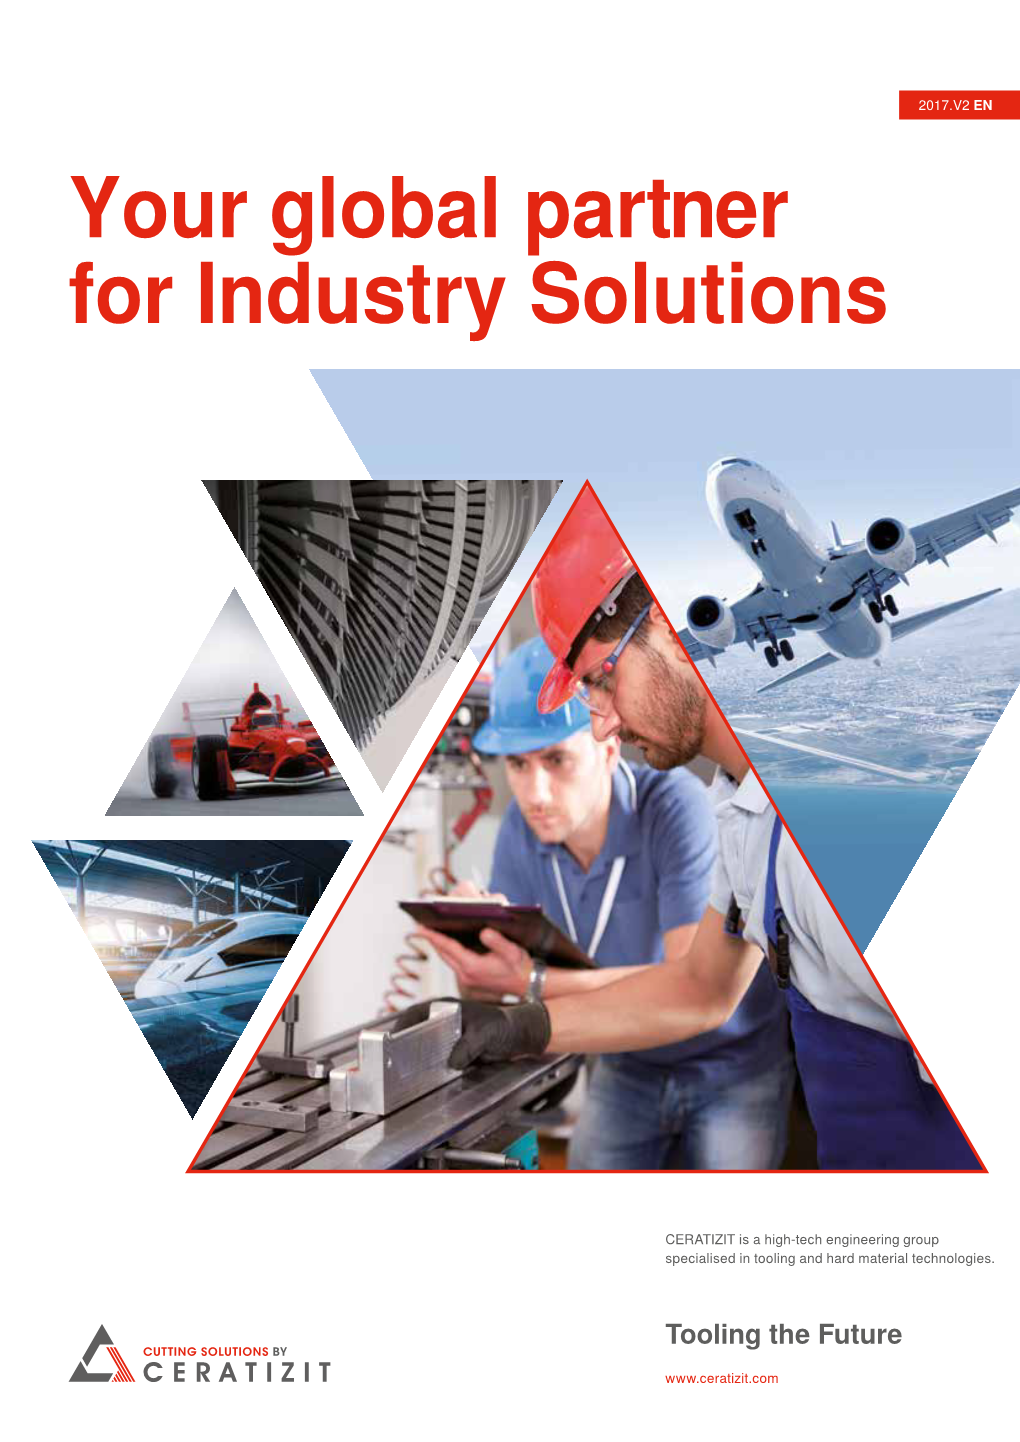 Your Global Partner for Industry Solutions